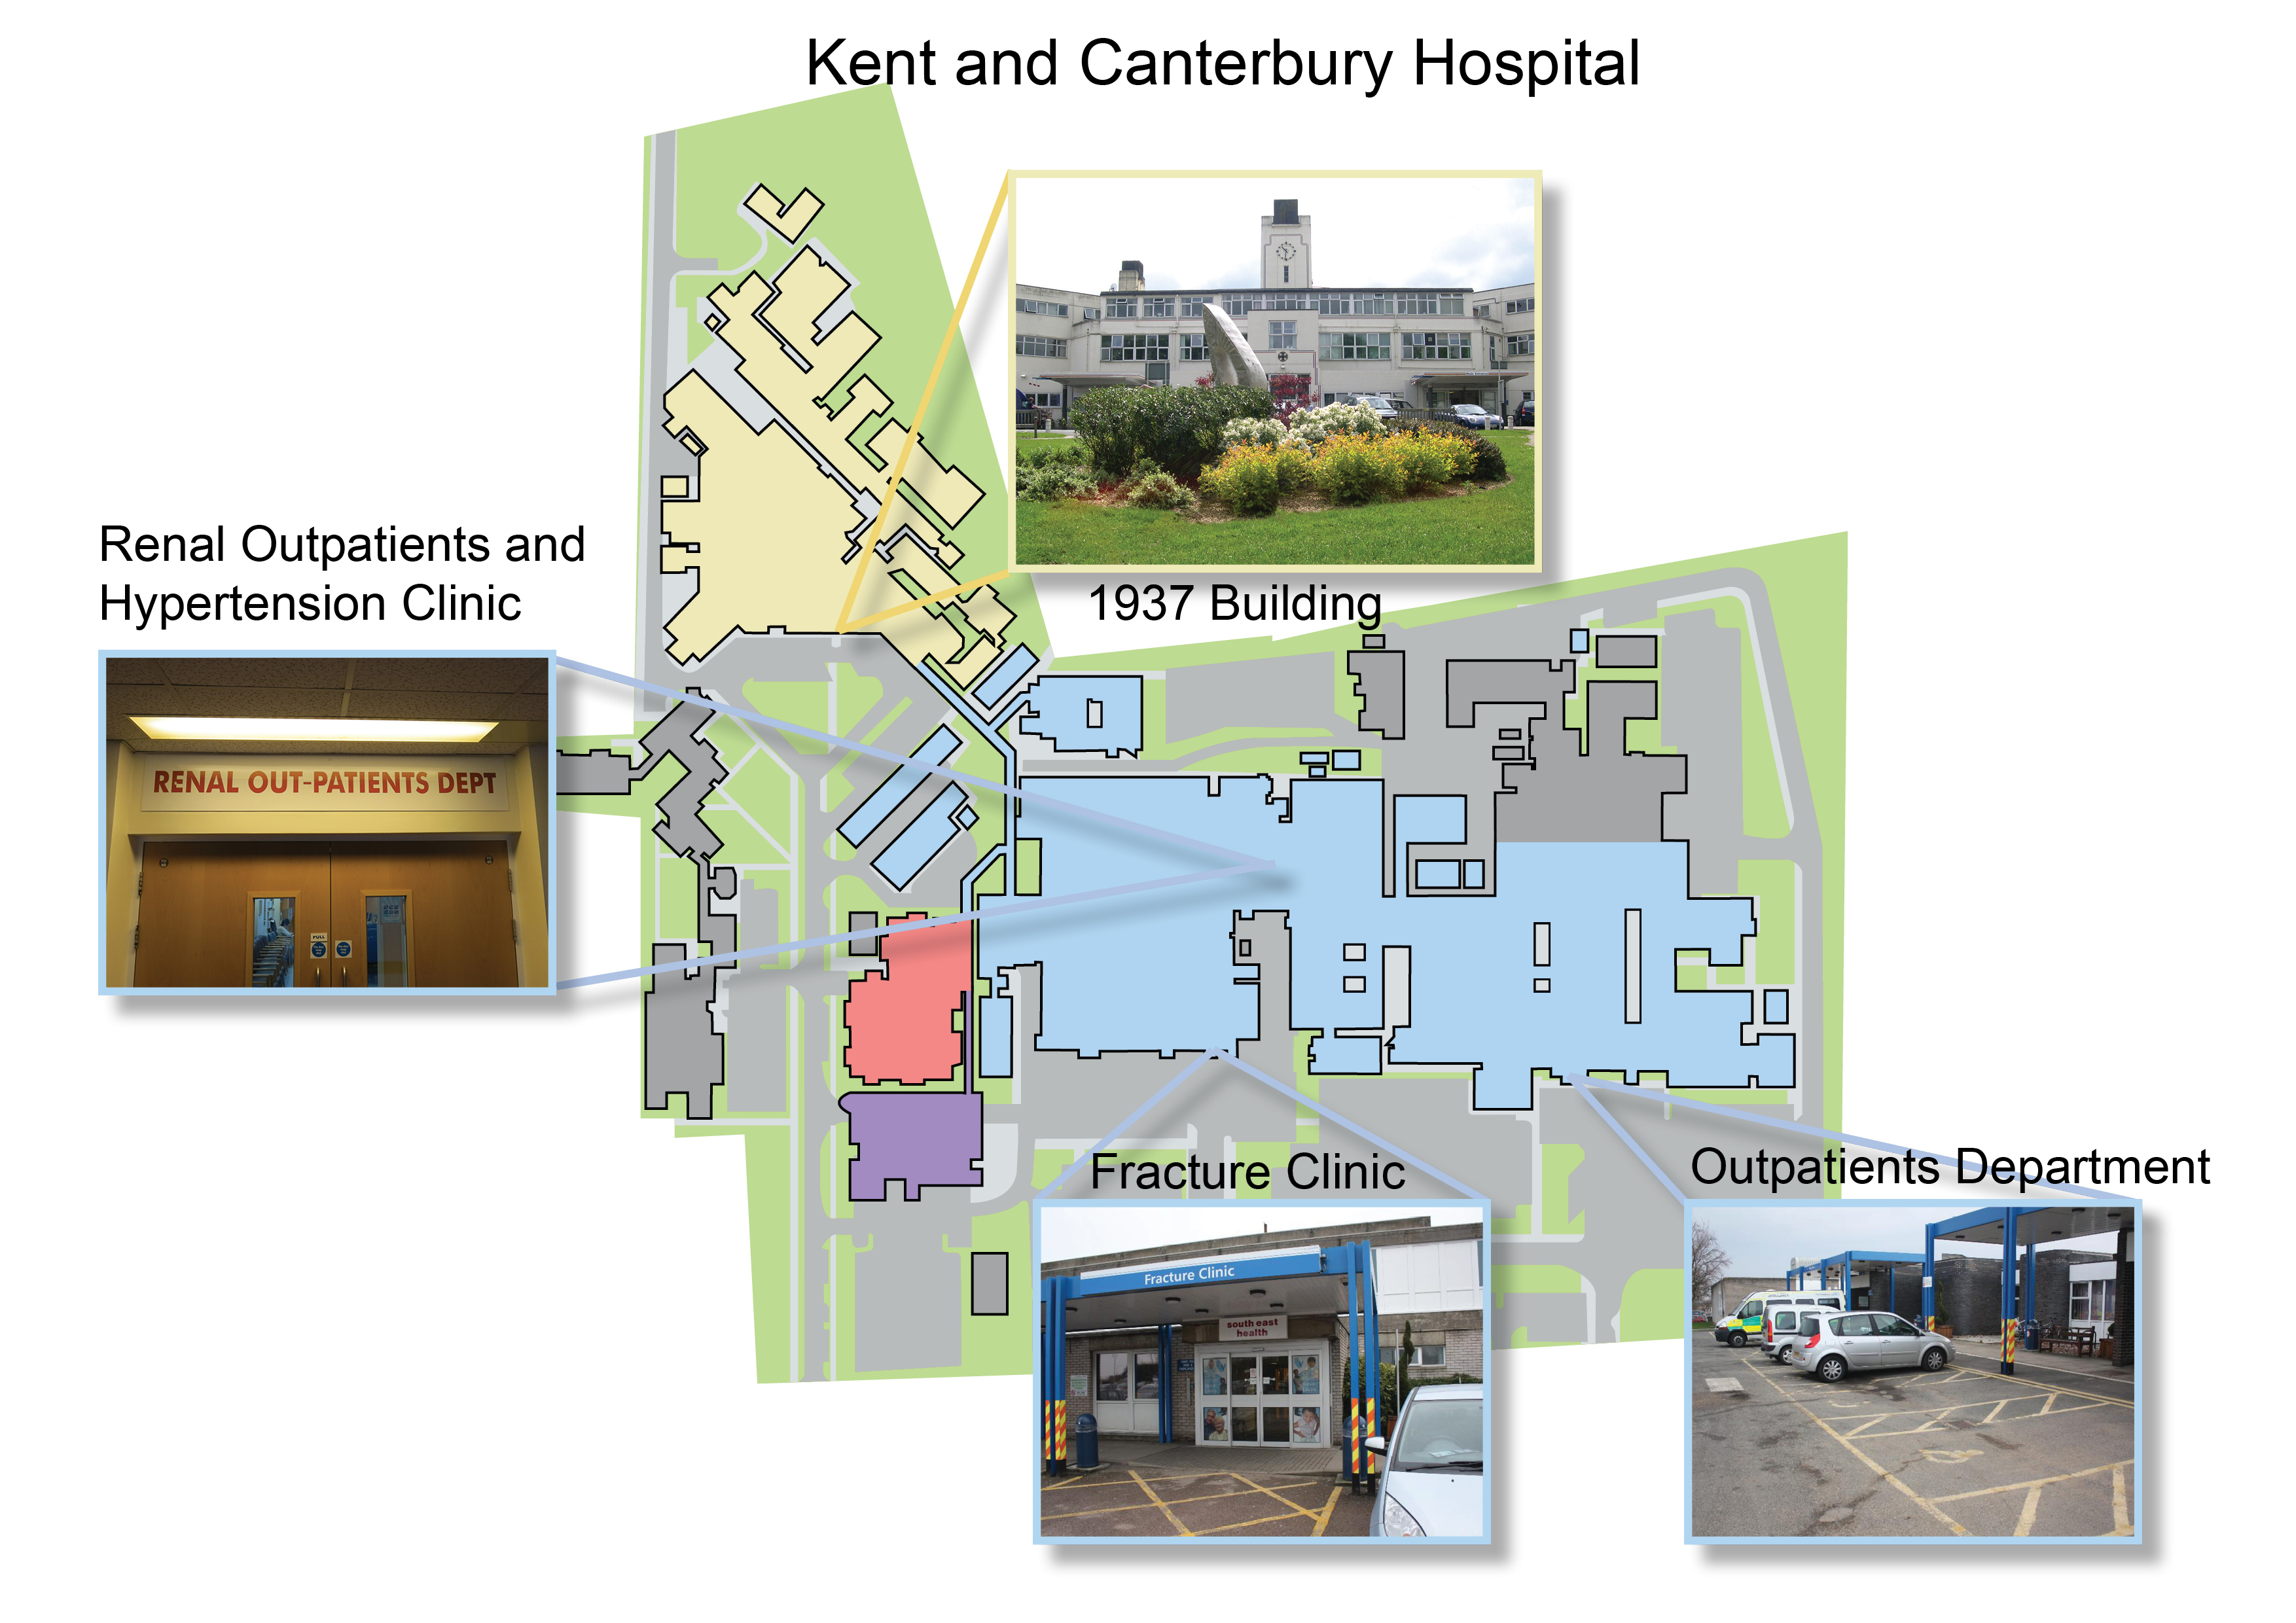 Map showing location of Renal Outpatients and the Hypertension Clinic at Kent and Canterbury Hospital